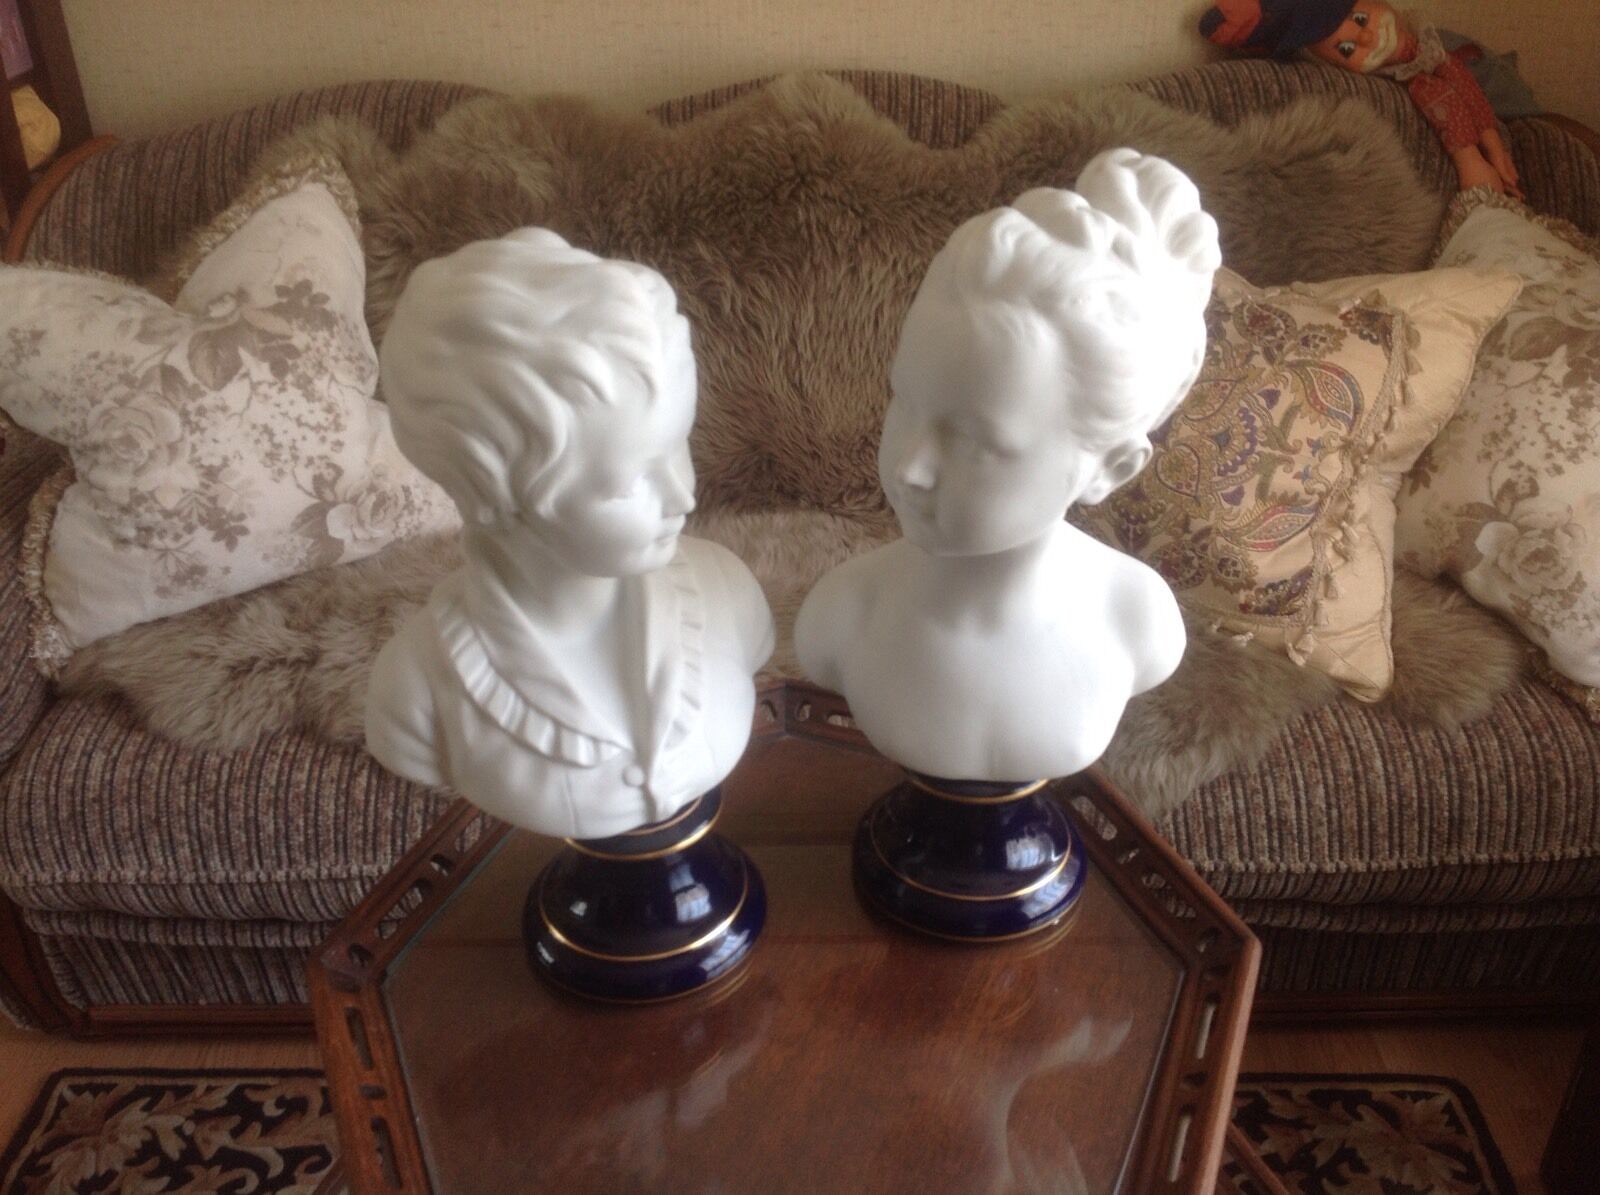 Rare Biscuit Busts Of Boy and Girl Limoges MNP By Jean-Antoine Houdon 1777